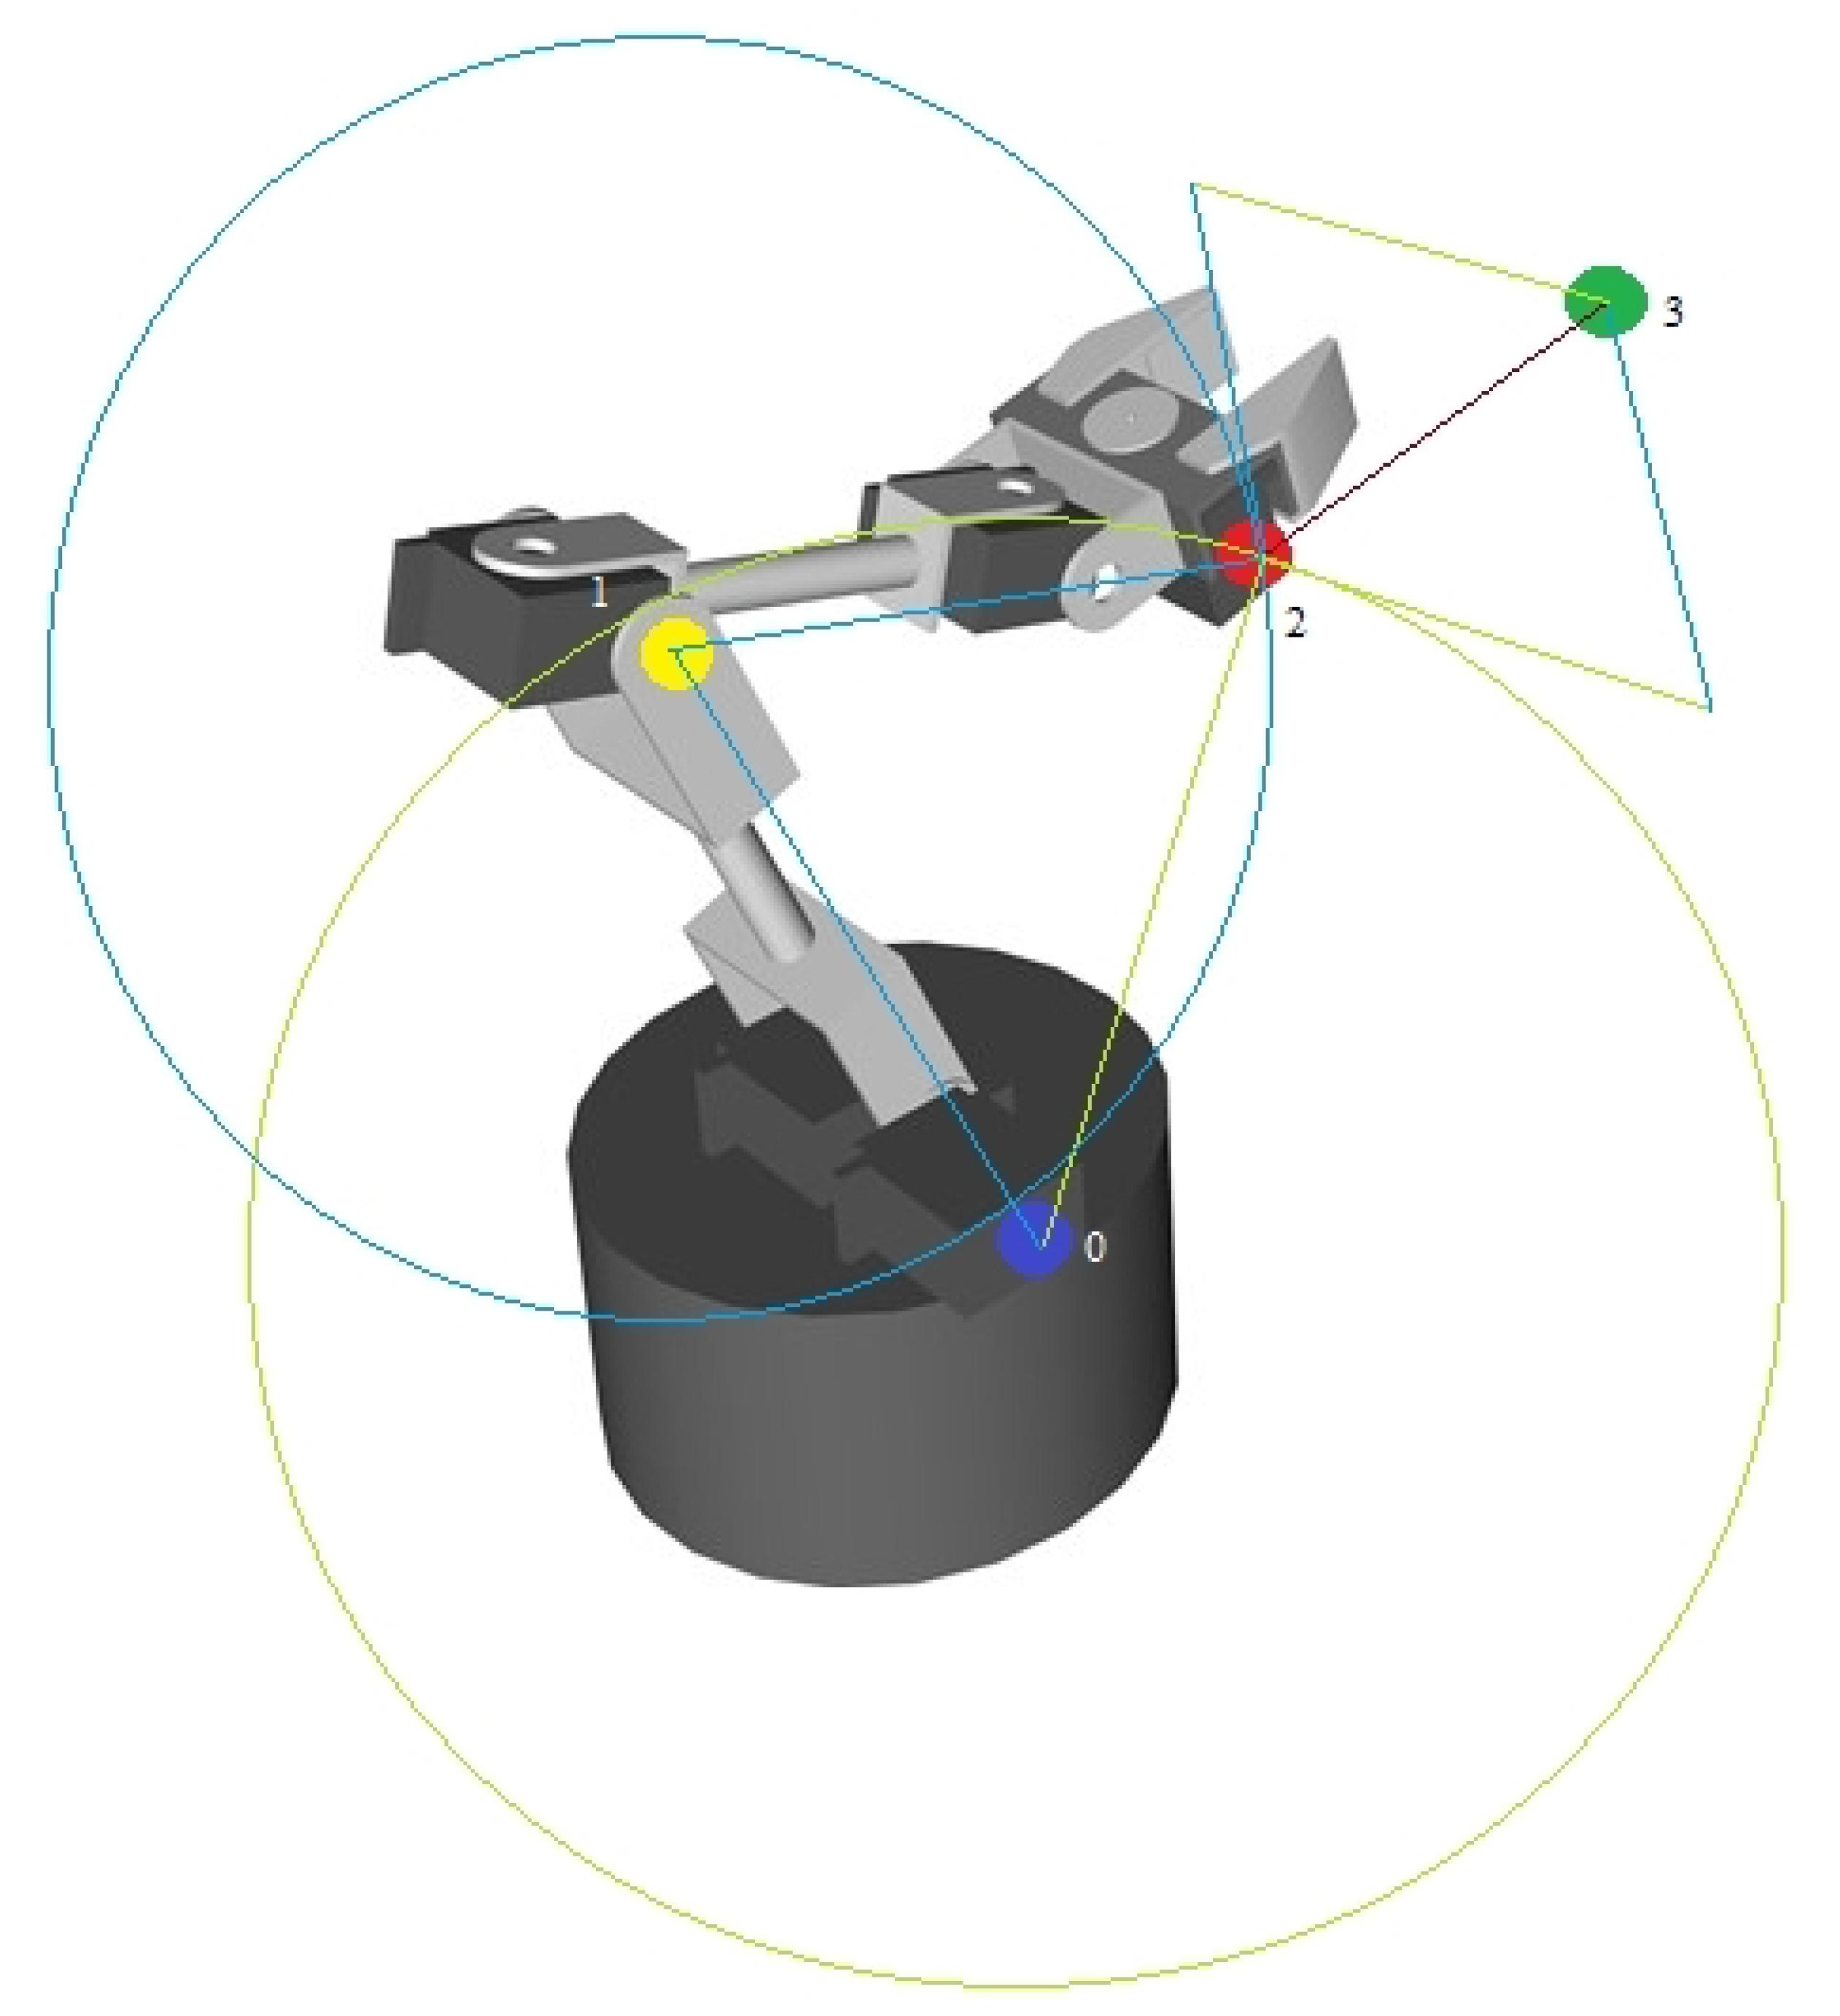 Actuators Free Full-Text | Robotic Arm Position Computing Method in the 2D 3D Spaces